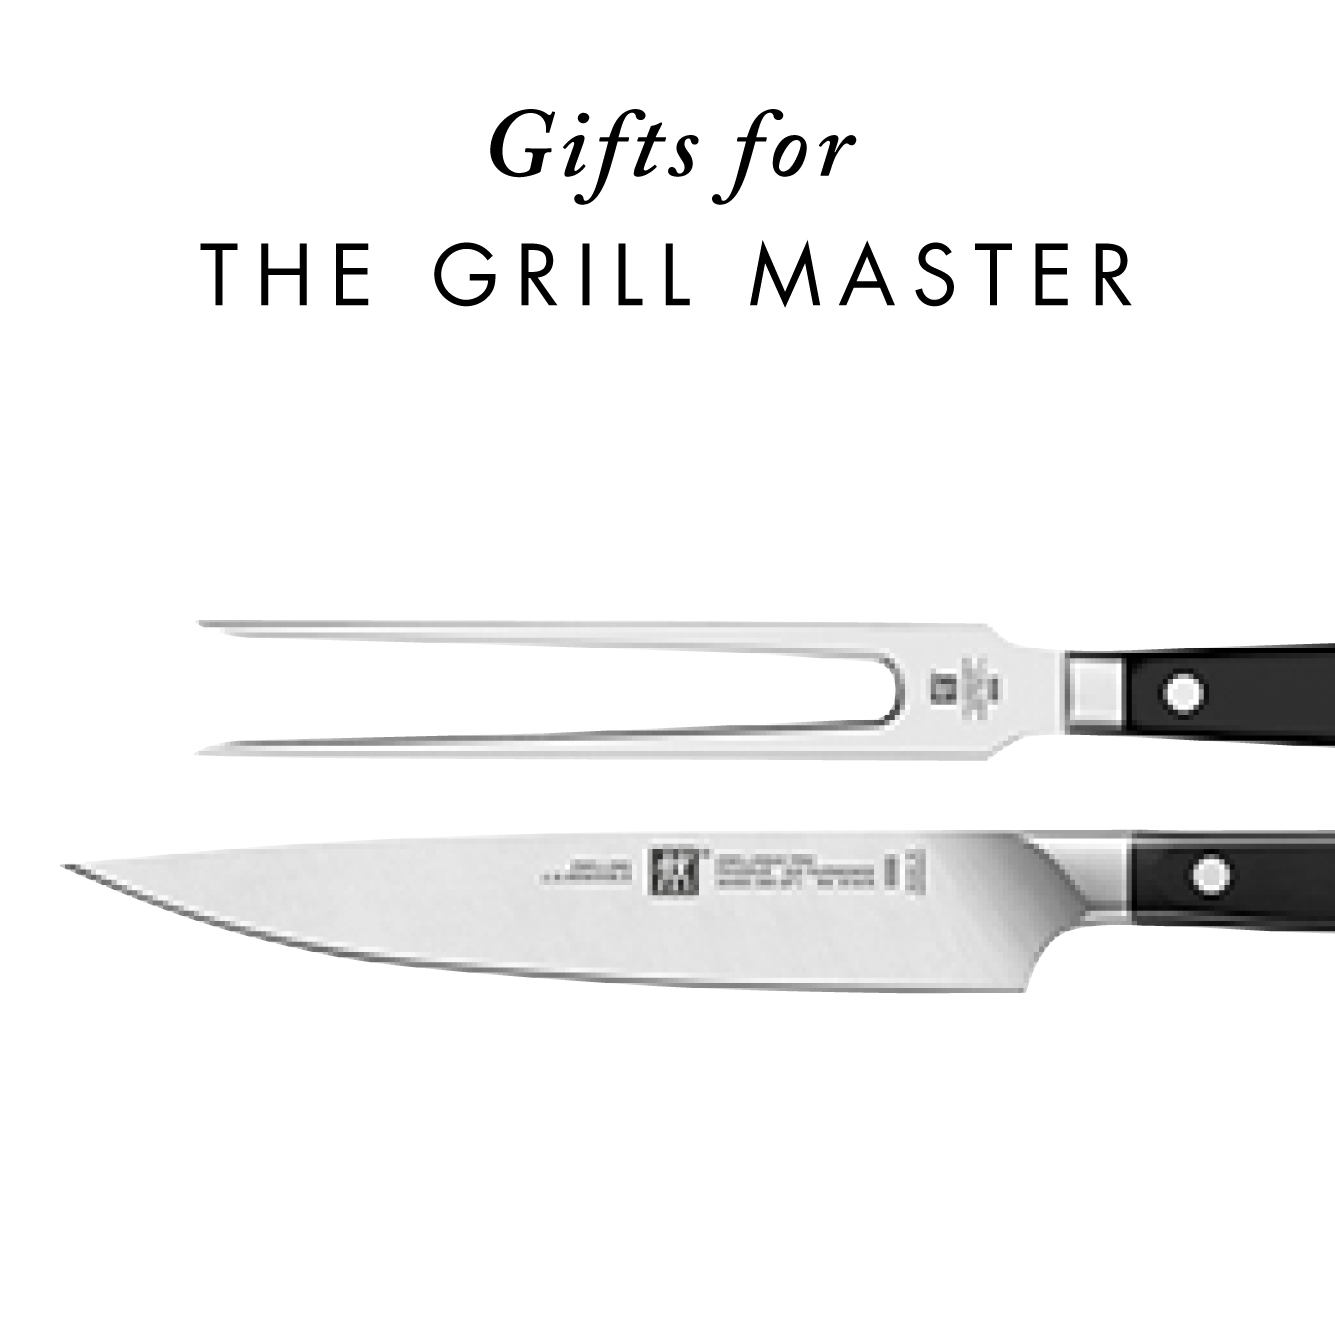 Gifts for the Grill Master